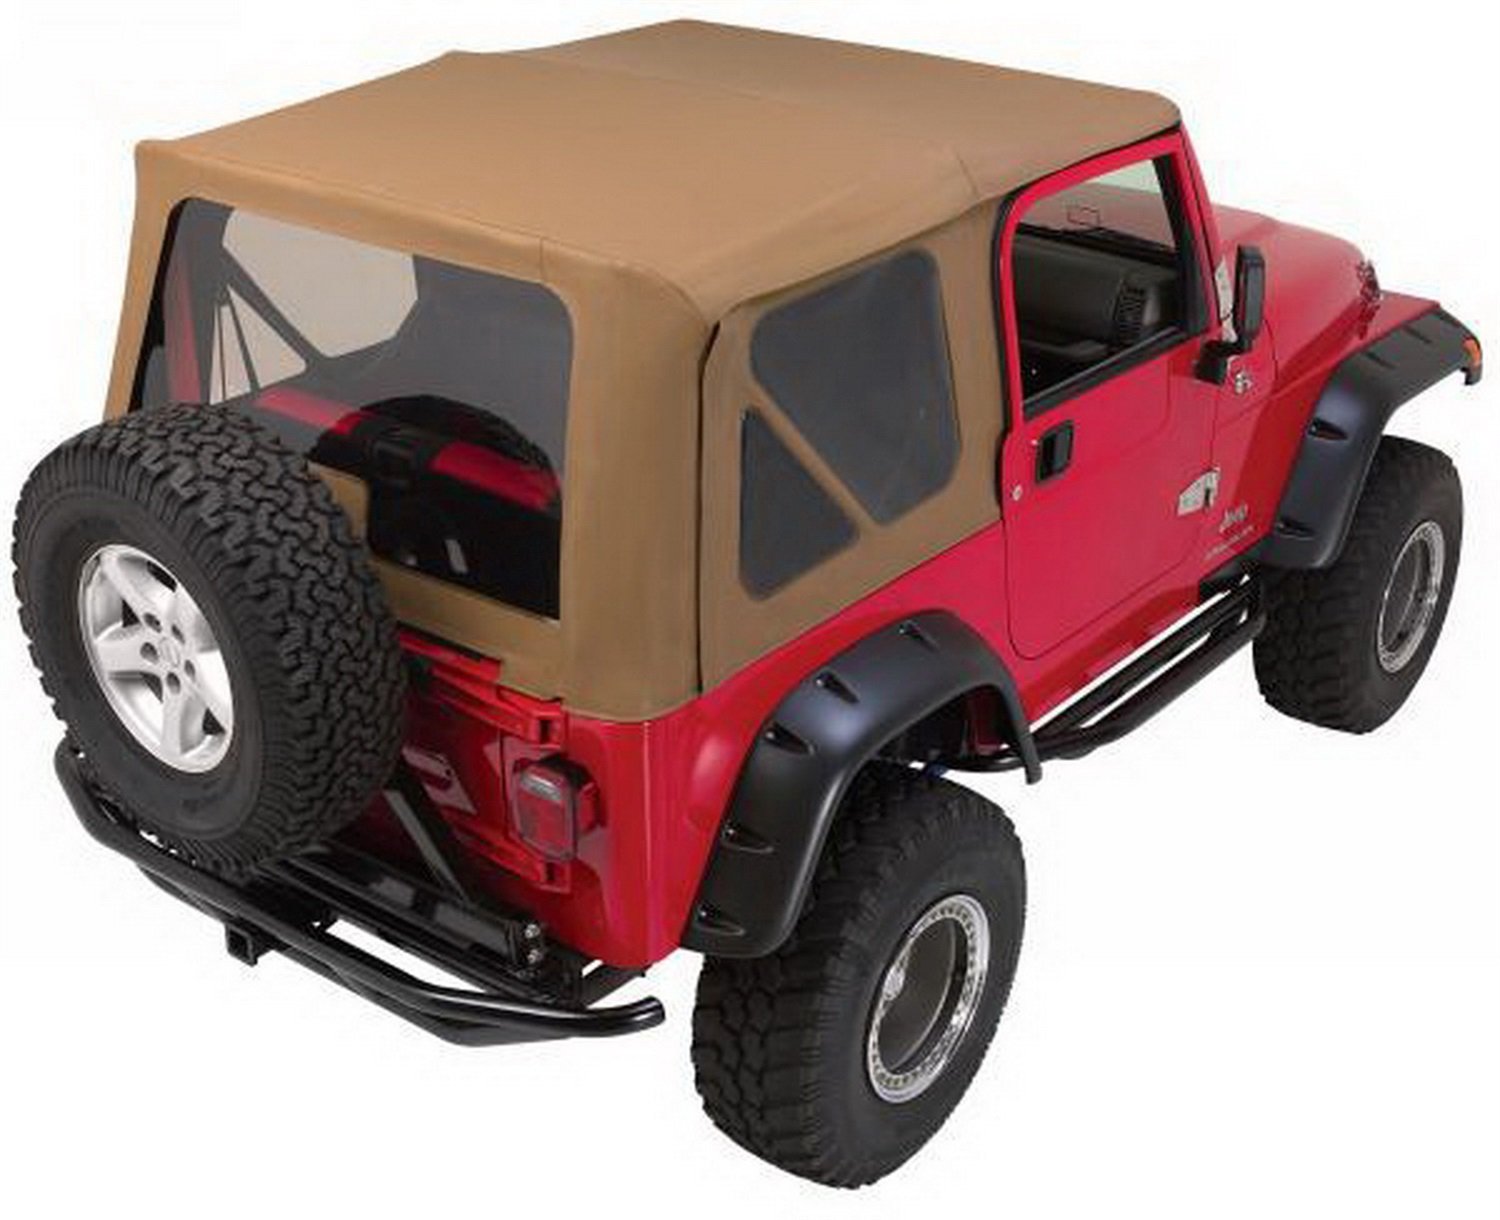 68817 Complete Soft Top Frame and Hardware Kit for 1997-2006 Jeep Wrangler TJ with Full Doors [Spice Denim]